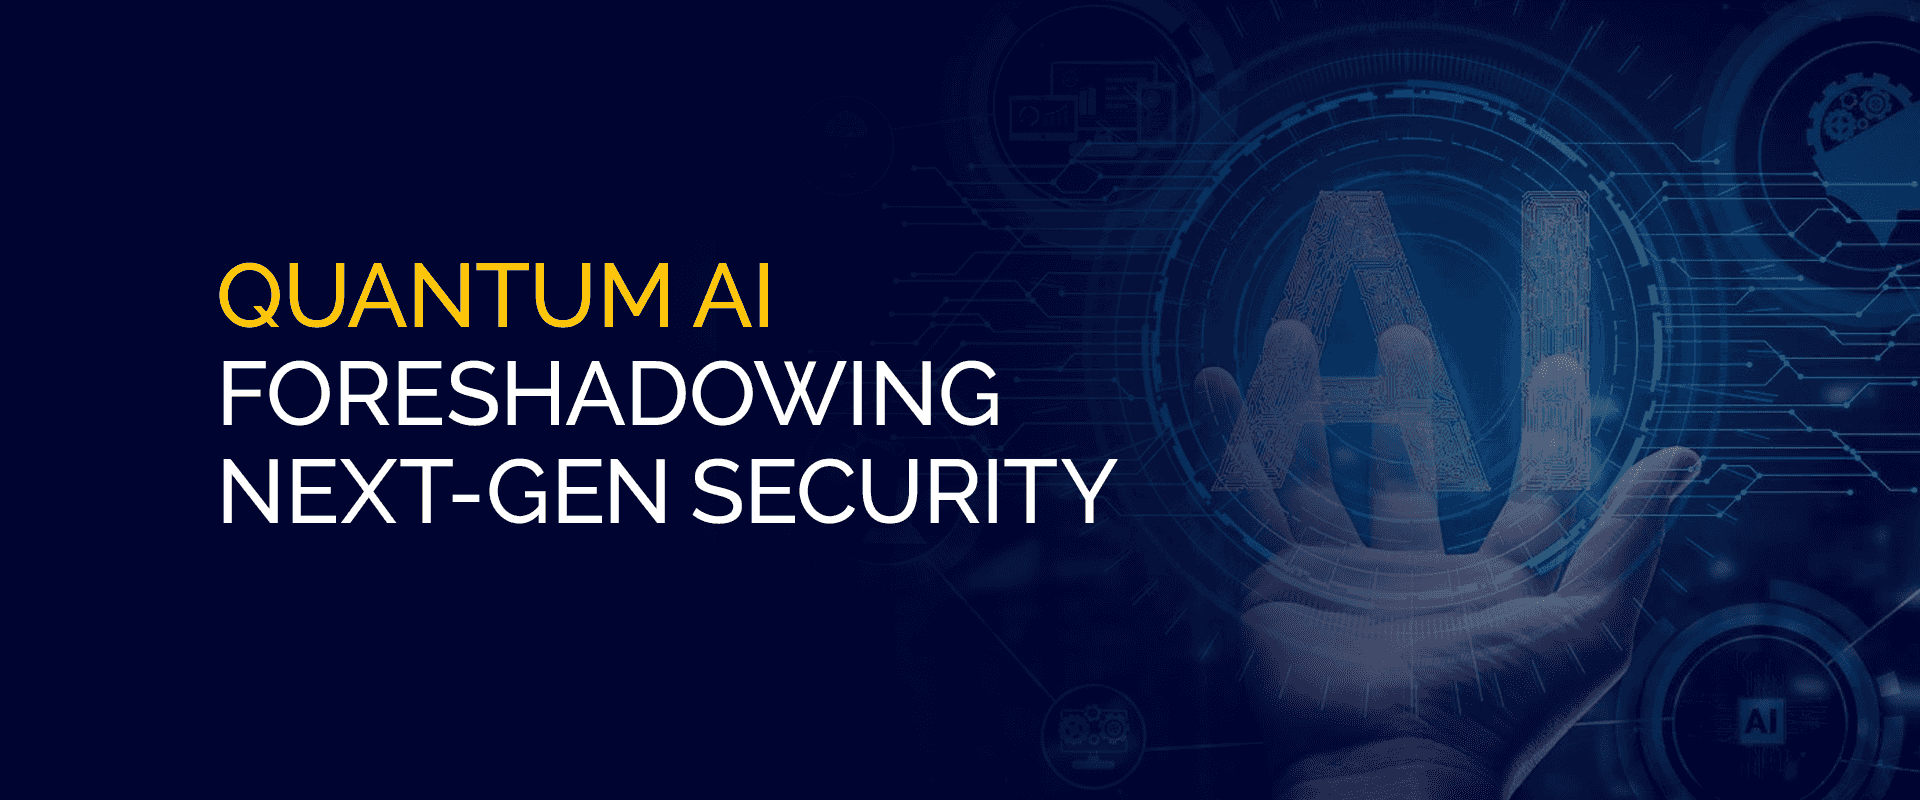 Quantum AI Foreshadowing Next-Gen Security